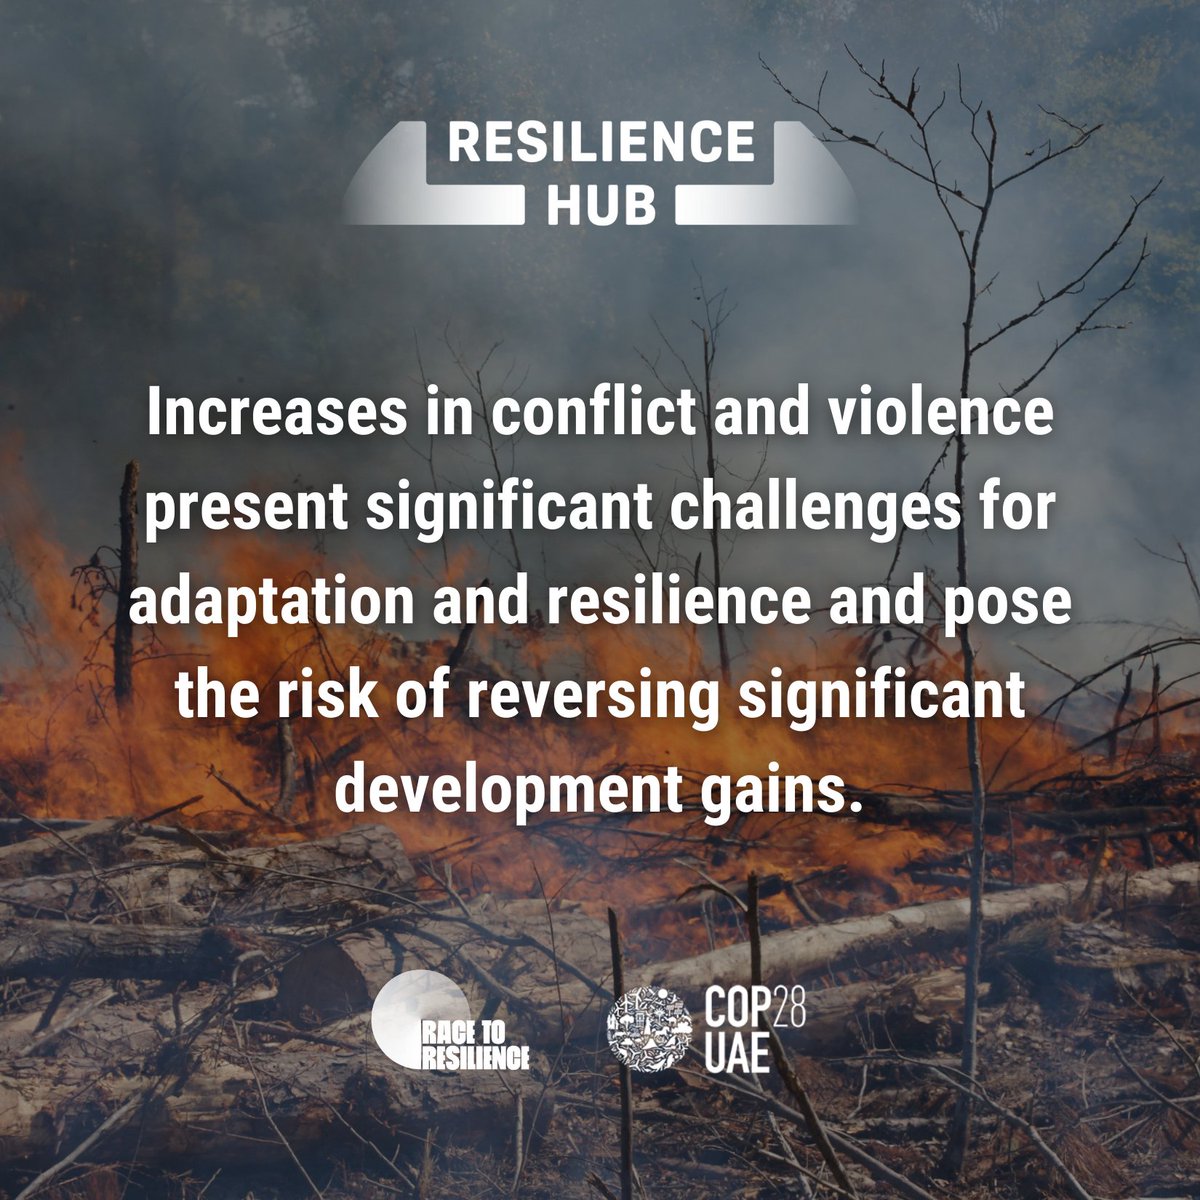 Here are the four main cross-cutting messages that emerged from the sessions hosted at the #COP28 Resilience Hub. A more in-depth analysis can be found in the COP28 Resilience Hub Synthesis Report, now available here: cop-resilience-hub.org/cop28-synthesi… #COPResilienceHub #RacetoResilience